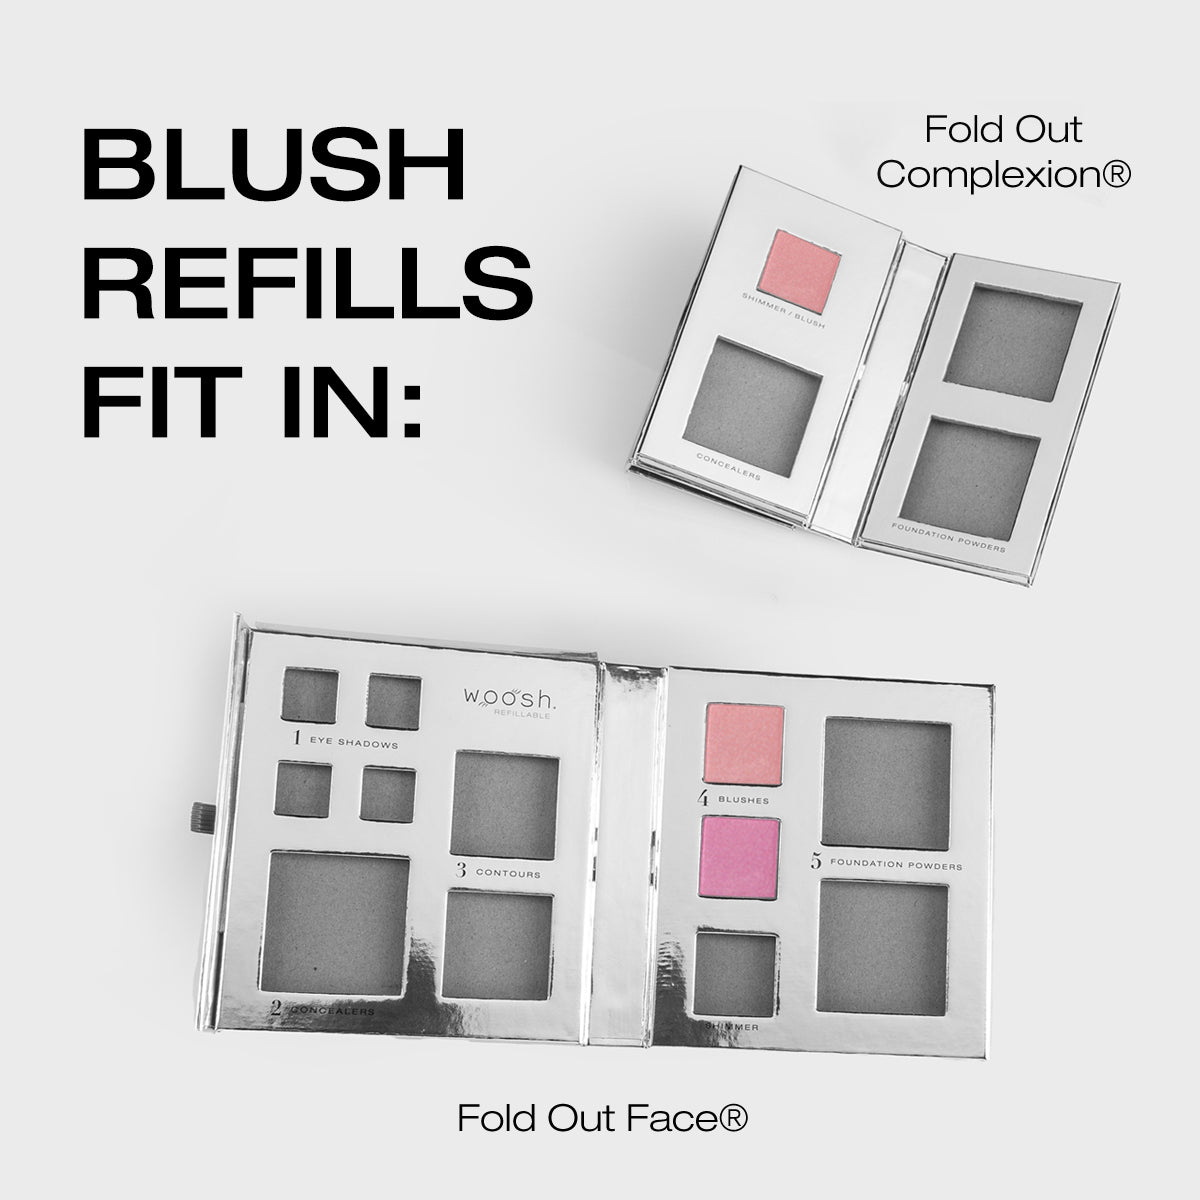 Demo of how the blush refills fit in the fold out face slots